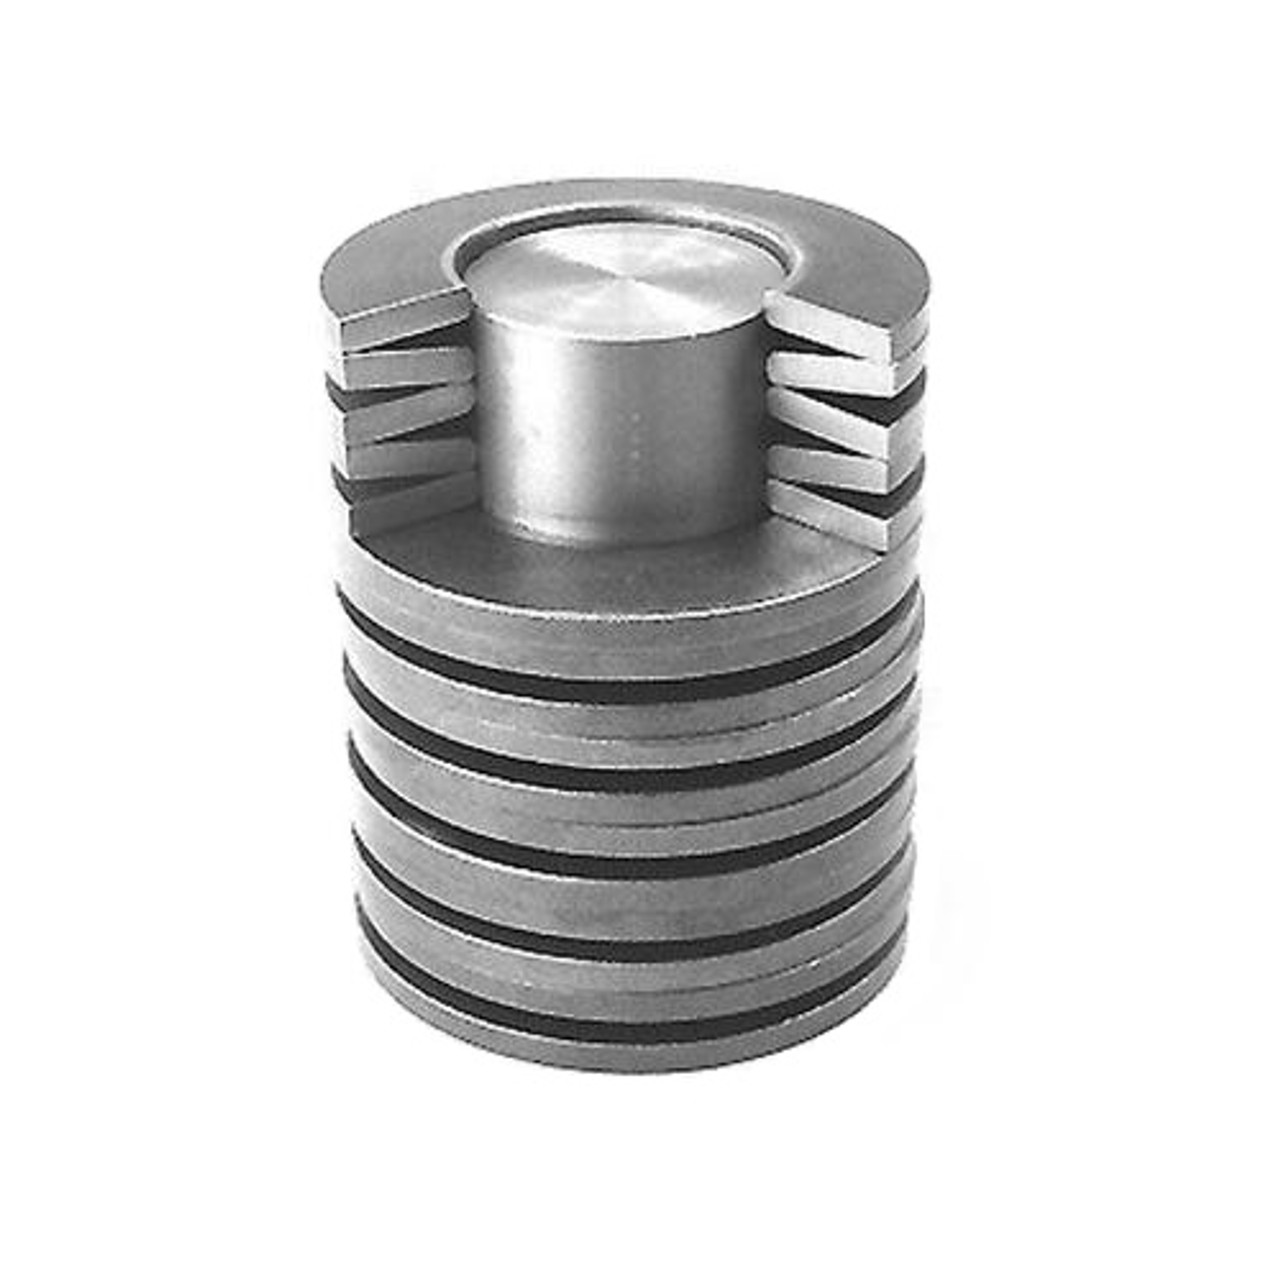 5mm Disc Spring (DIN 2093) Conical Washer  DS005.2-013-05